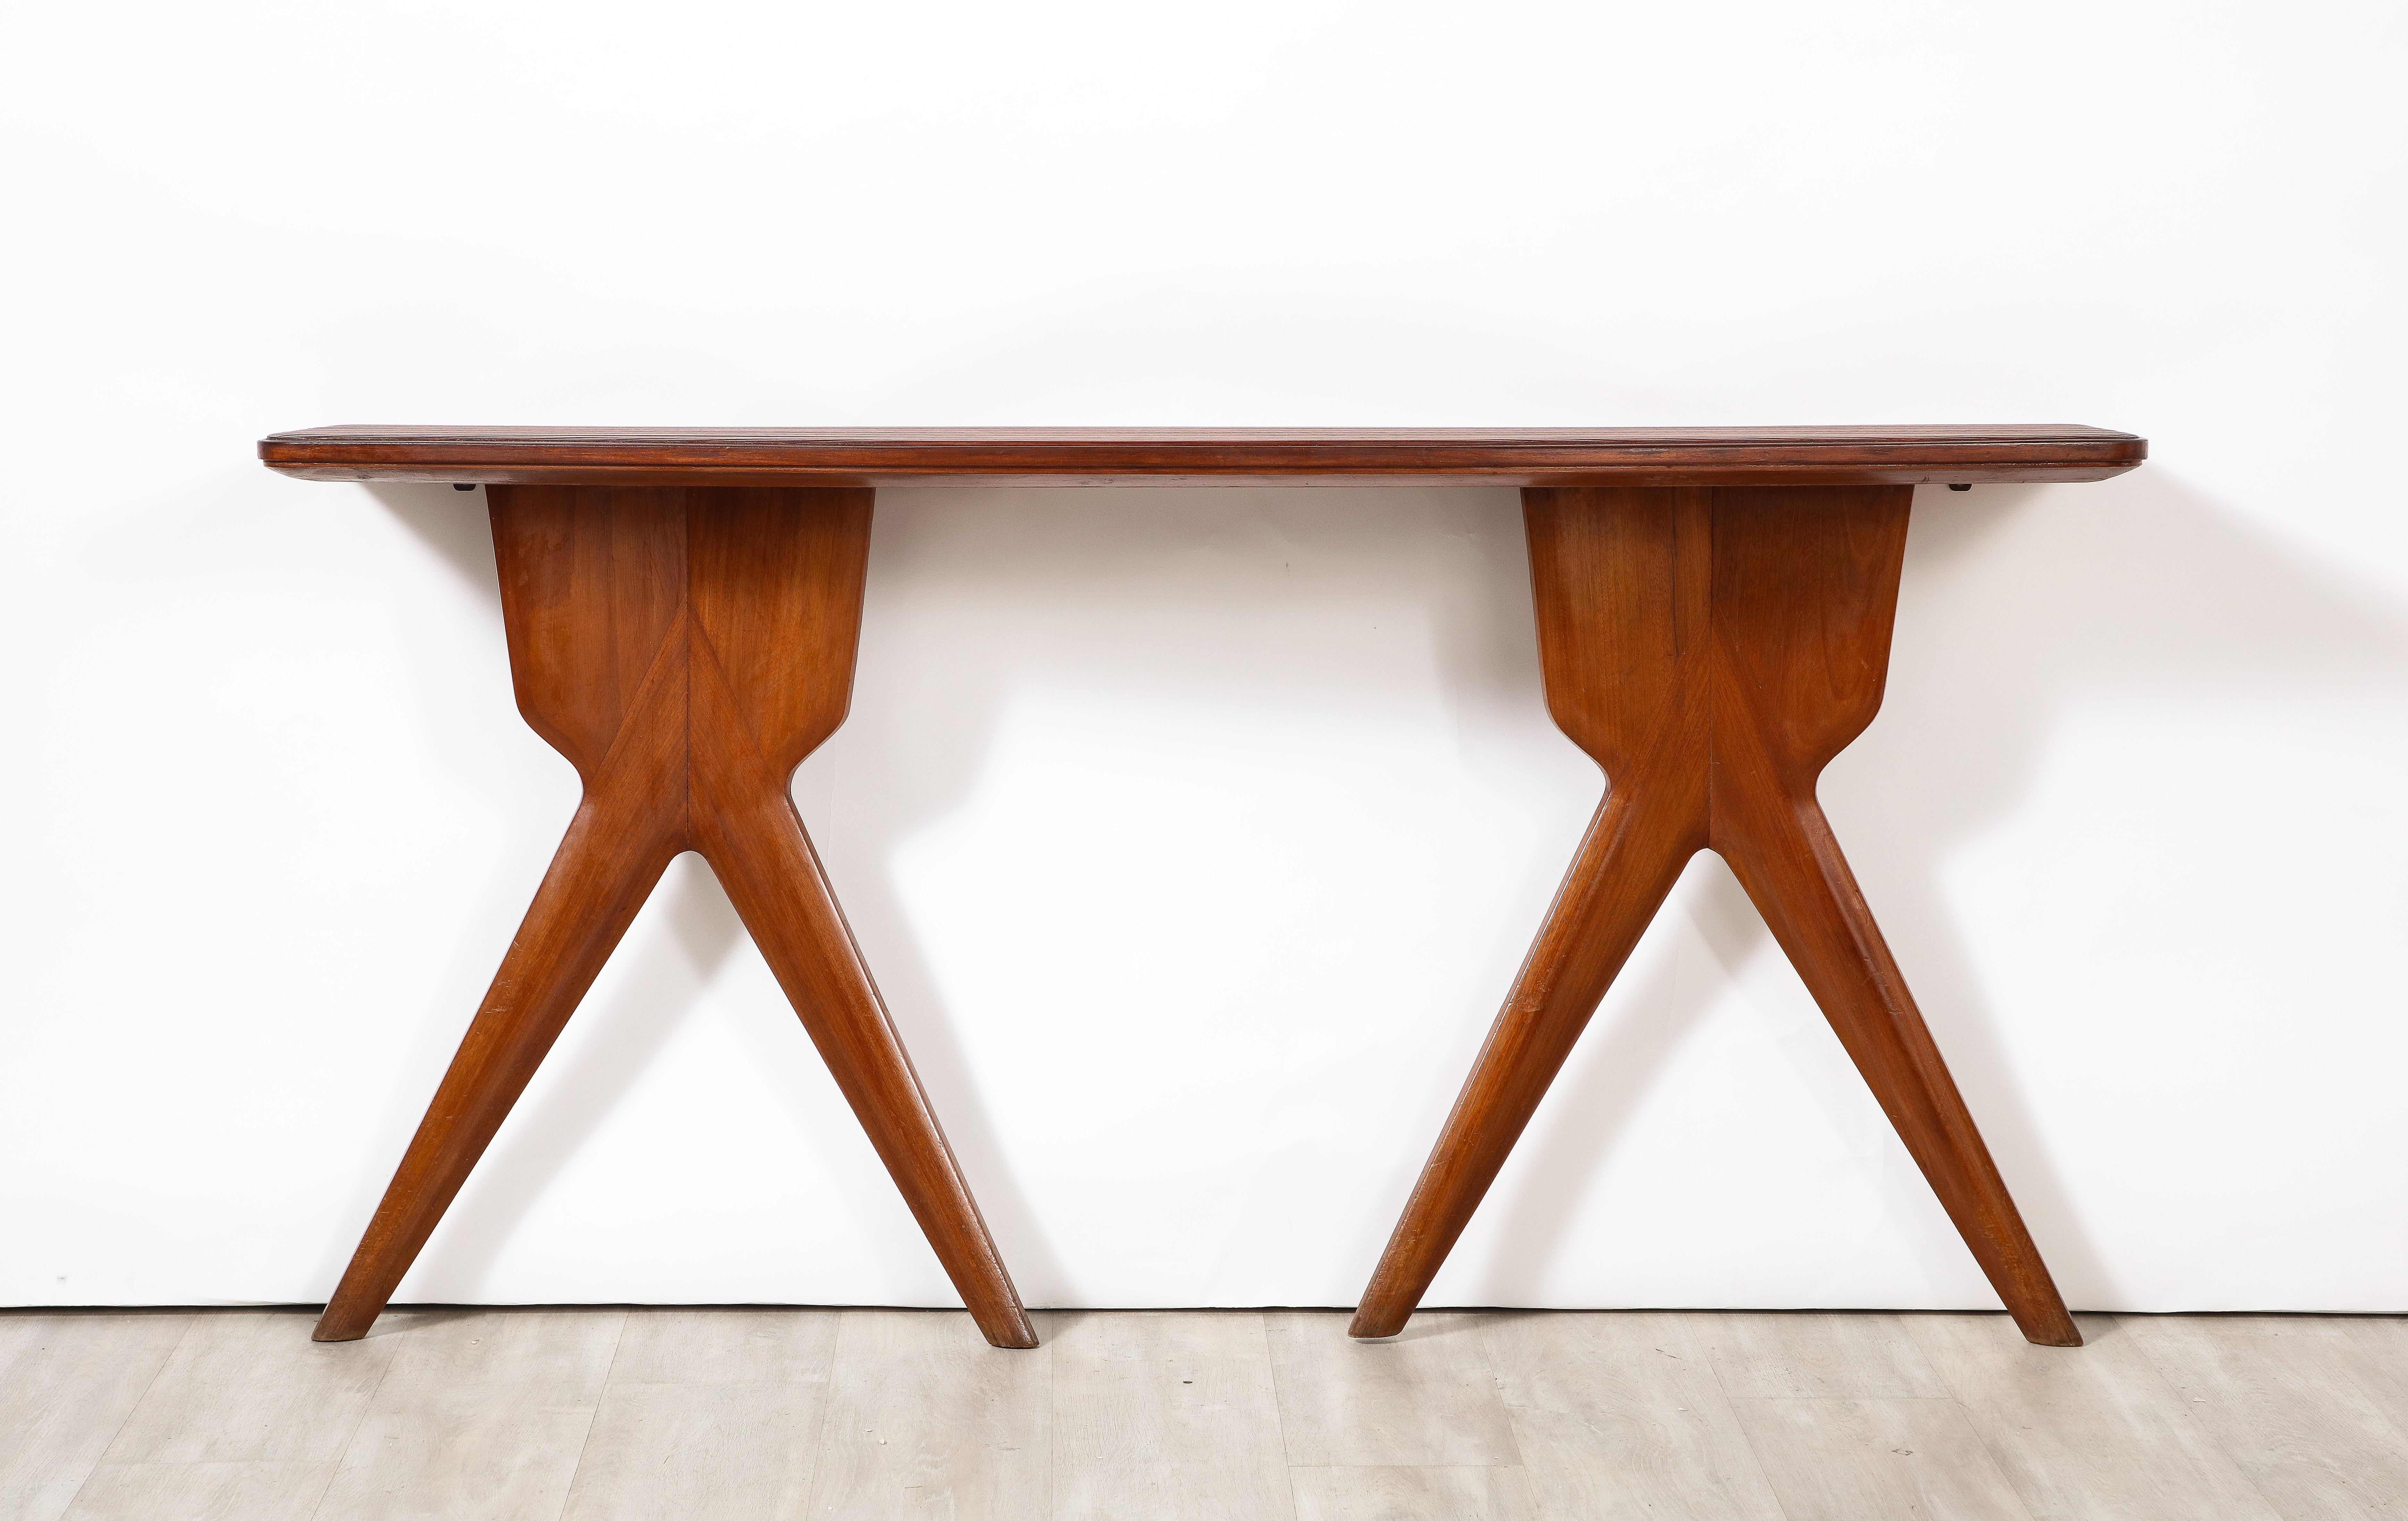 An Italian modernist walnut wall mounted console; the top is beautifully shaped and fluted and the two bases with wonderful splayed shapes.  A very unique design.
Italy, circa 1960 
Size: 31 1/2